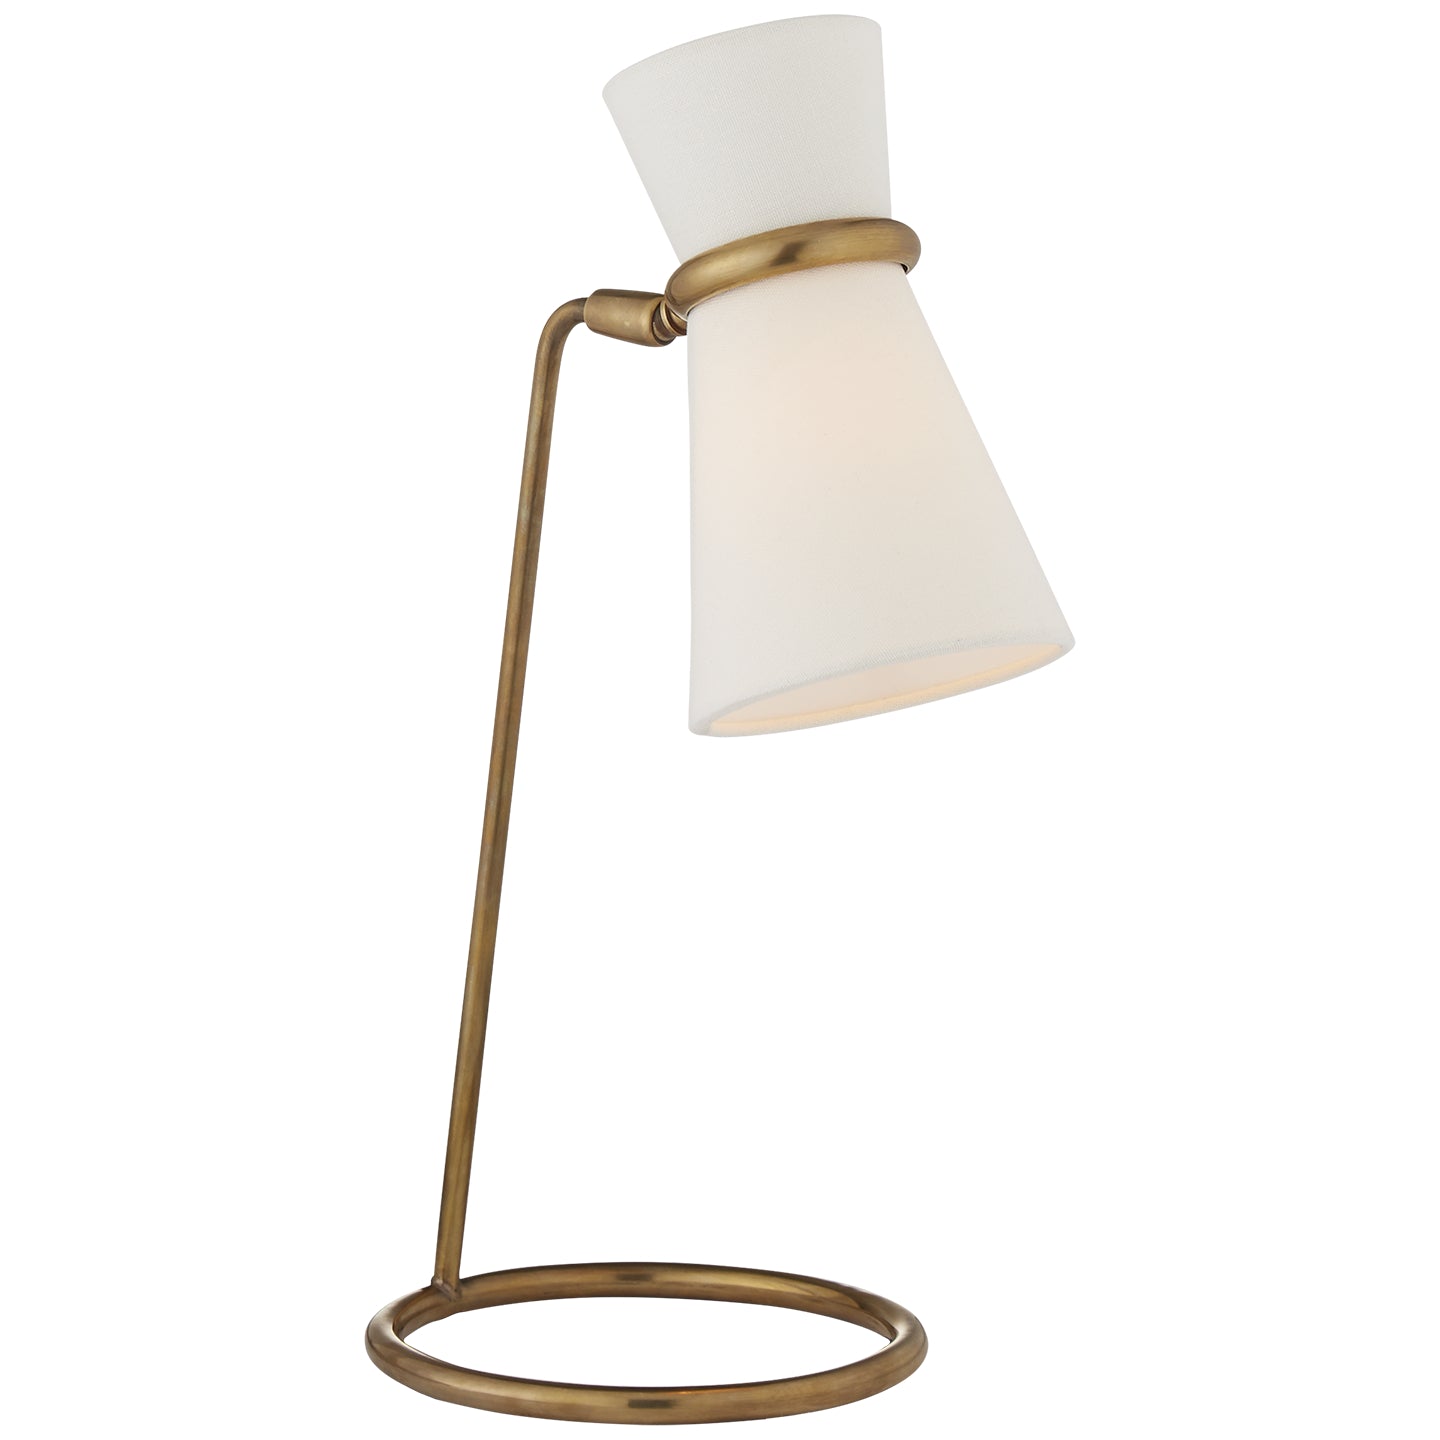 Visual Comfort Signature - ARN 3003HAB-L - One Light Table Lamp - Clarkson - Hand-Rubbed Antique Brass